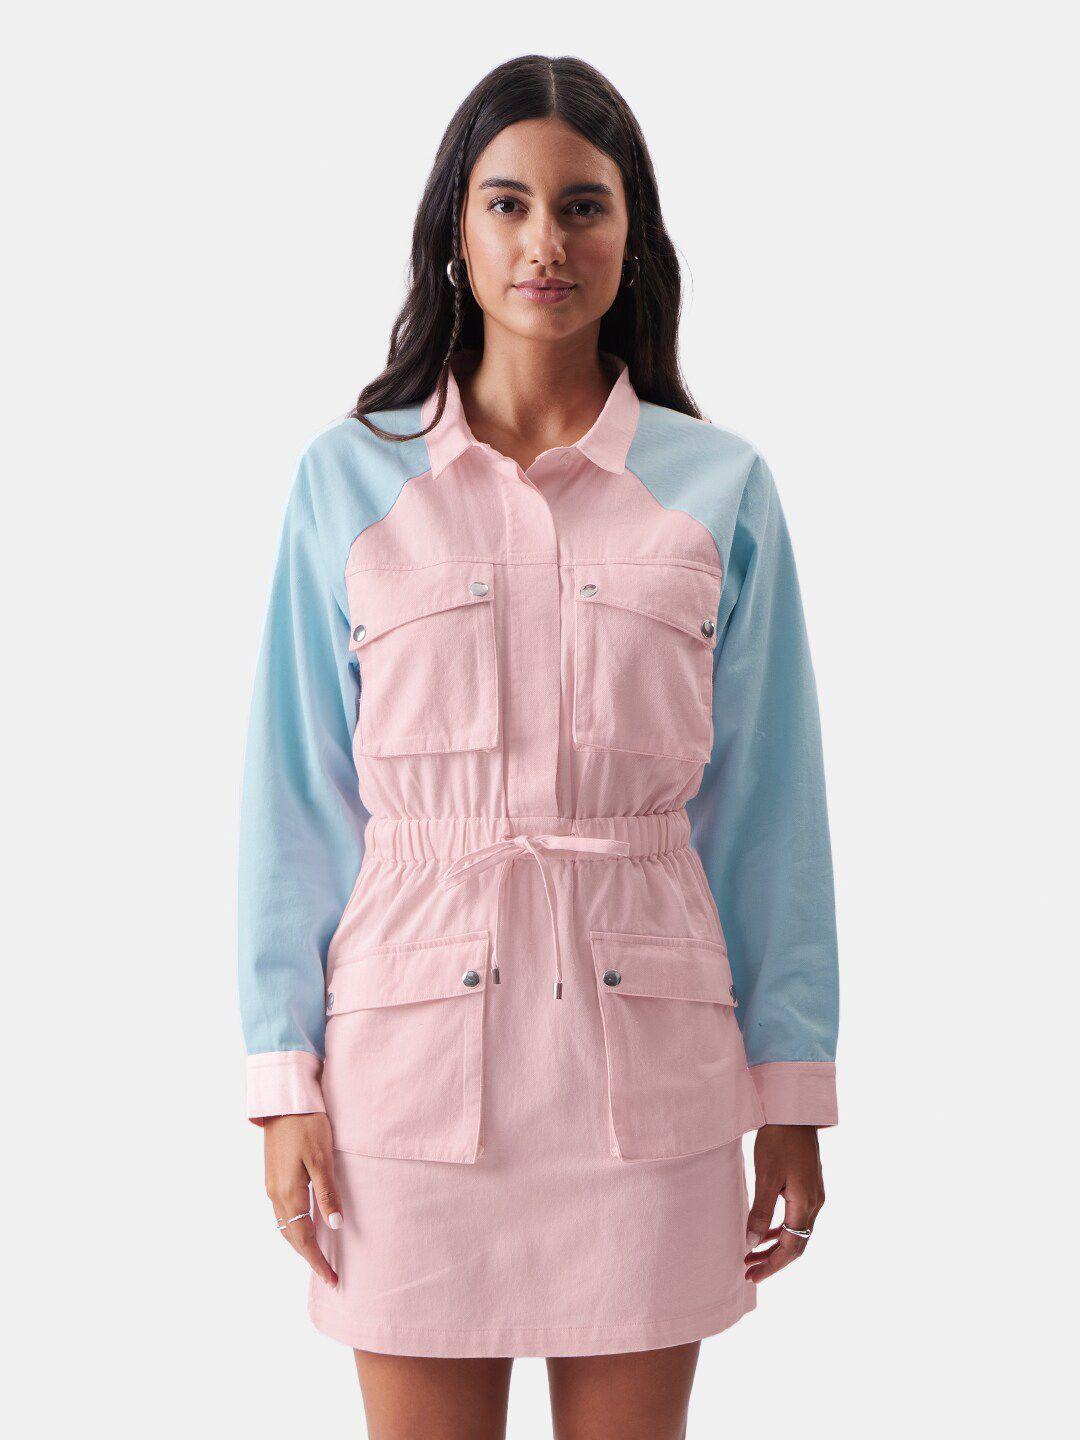 the-souled-store-pink-&-blue-colourblocked-cuffed-sleeves-pure-cotton-shirt-dress